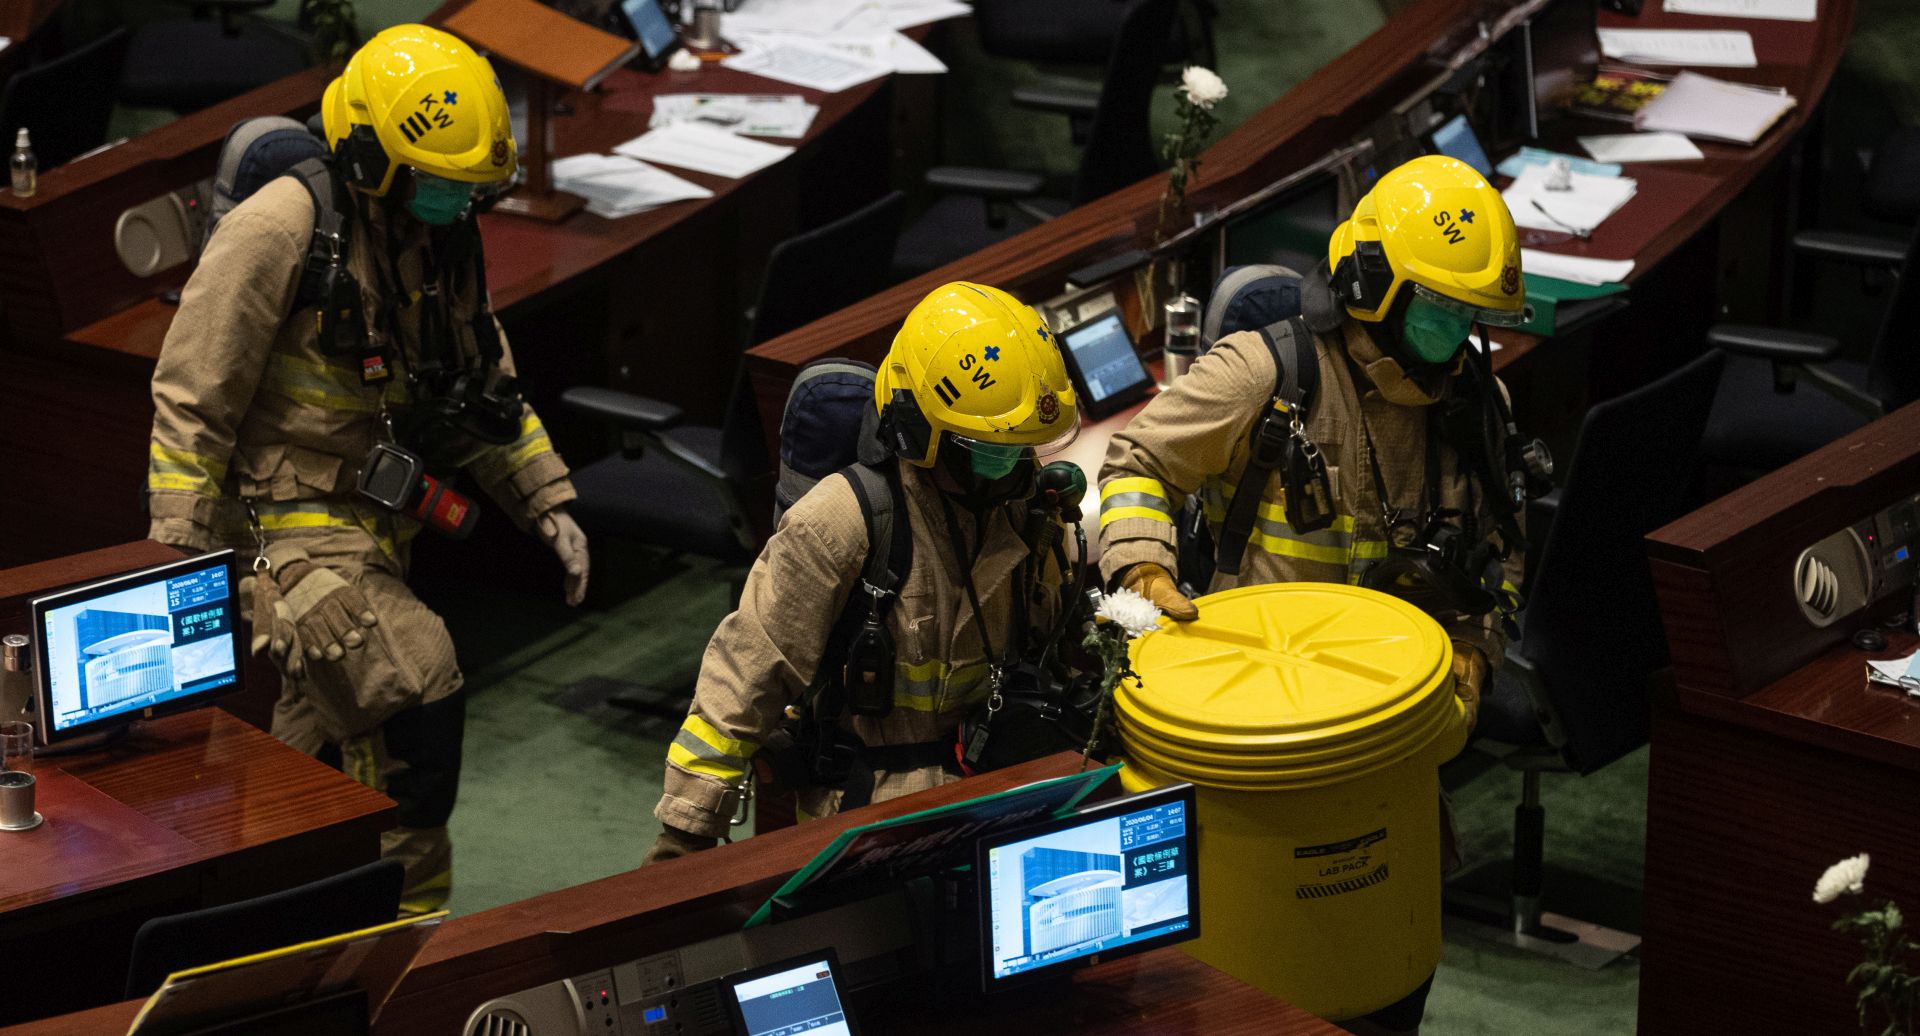 epa08464147 Firefighters carry a container filled with a foul-smelling object thrown by pan-democrat lawmakers during the third reading of the National Anthem bill at the Legislative Council in Hong Kong, China, 04 June 2020. Under the bill, anyone convicted of misusing or insulting the 'March of the Volunteers', the national anthem of the People's Republic of China, could face a fine of up to 50,000 Hong Kong dollars (6,449 US dollars) and three years in jail.  EPA/JEROME FAVRE